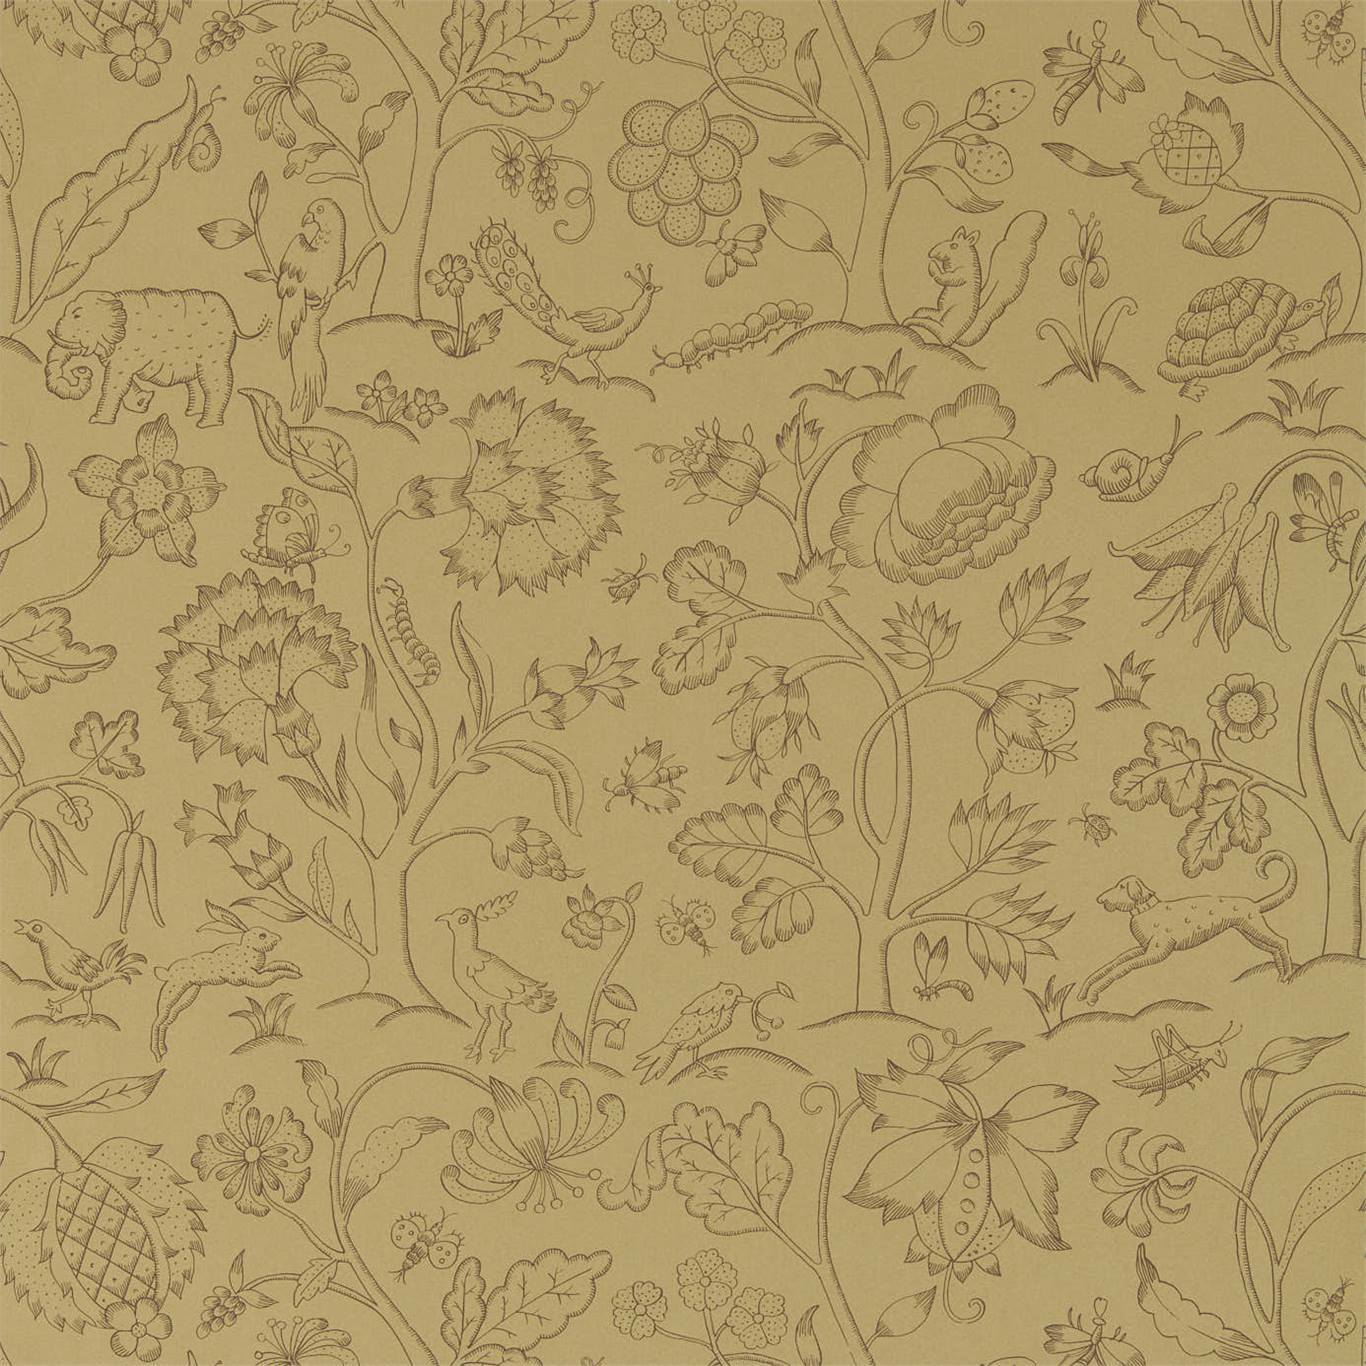 Middlemore Antique Gold Wallpaper DMSW216696 by Morris & Co